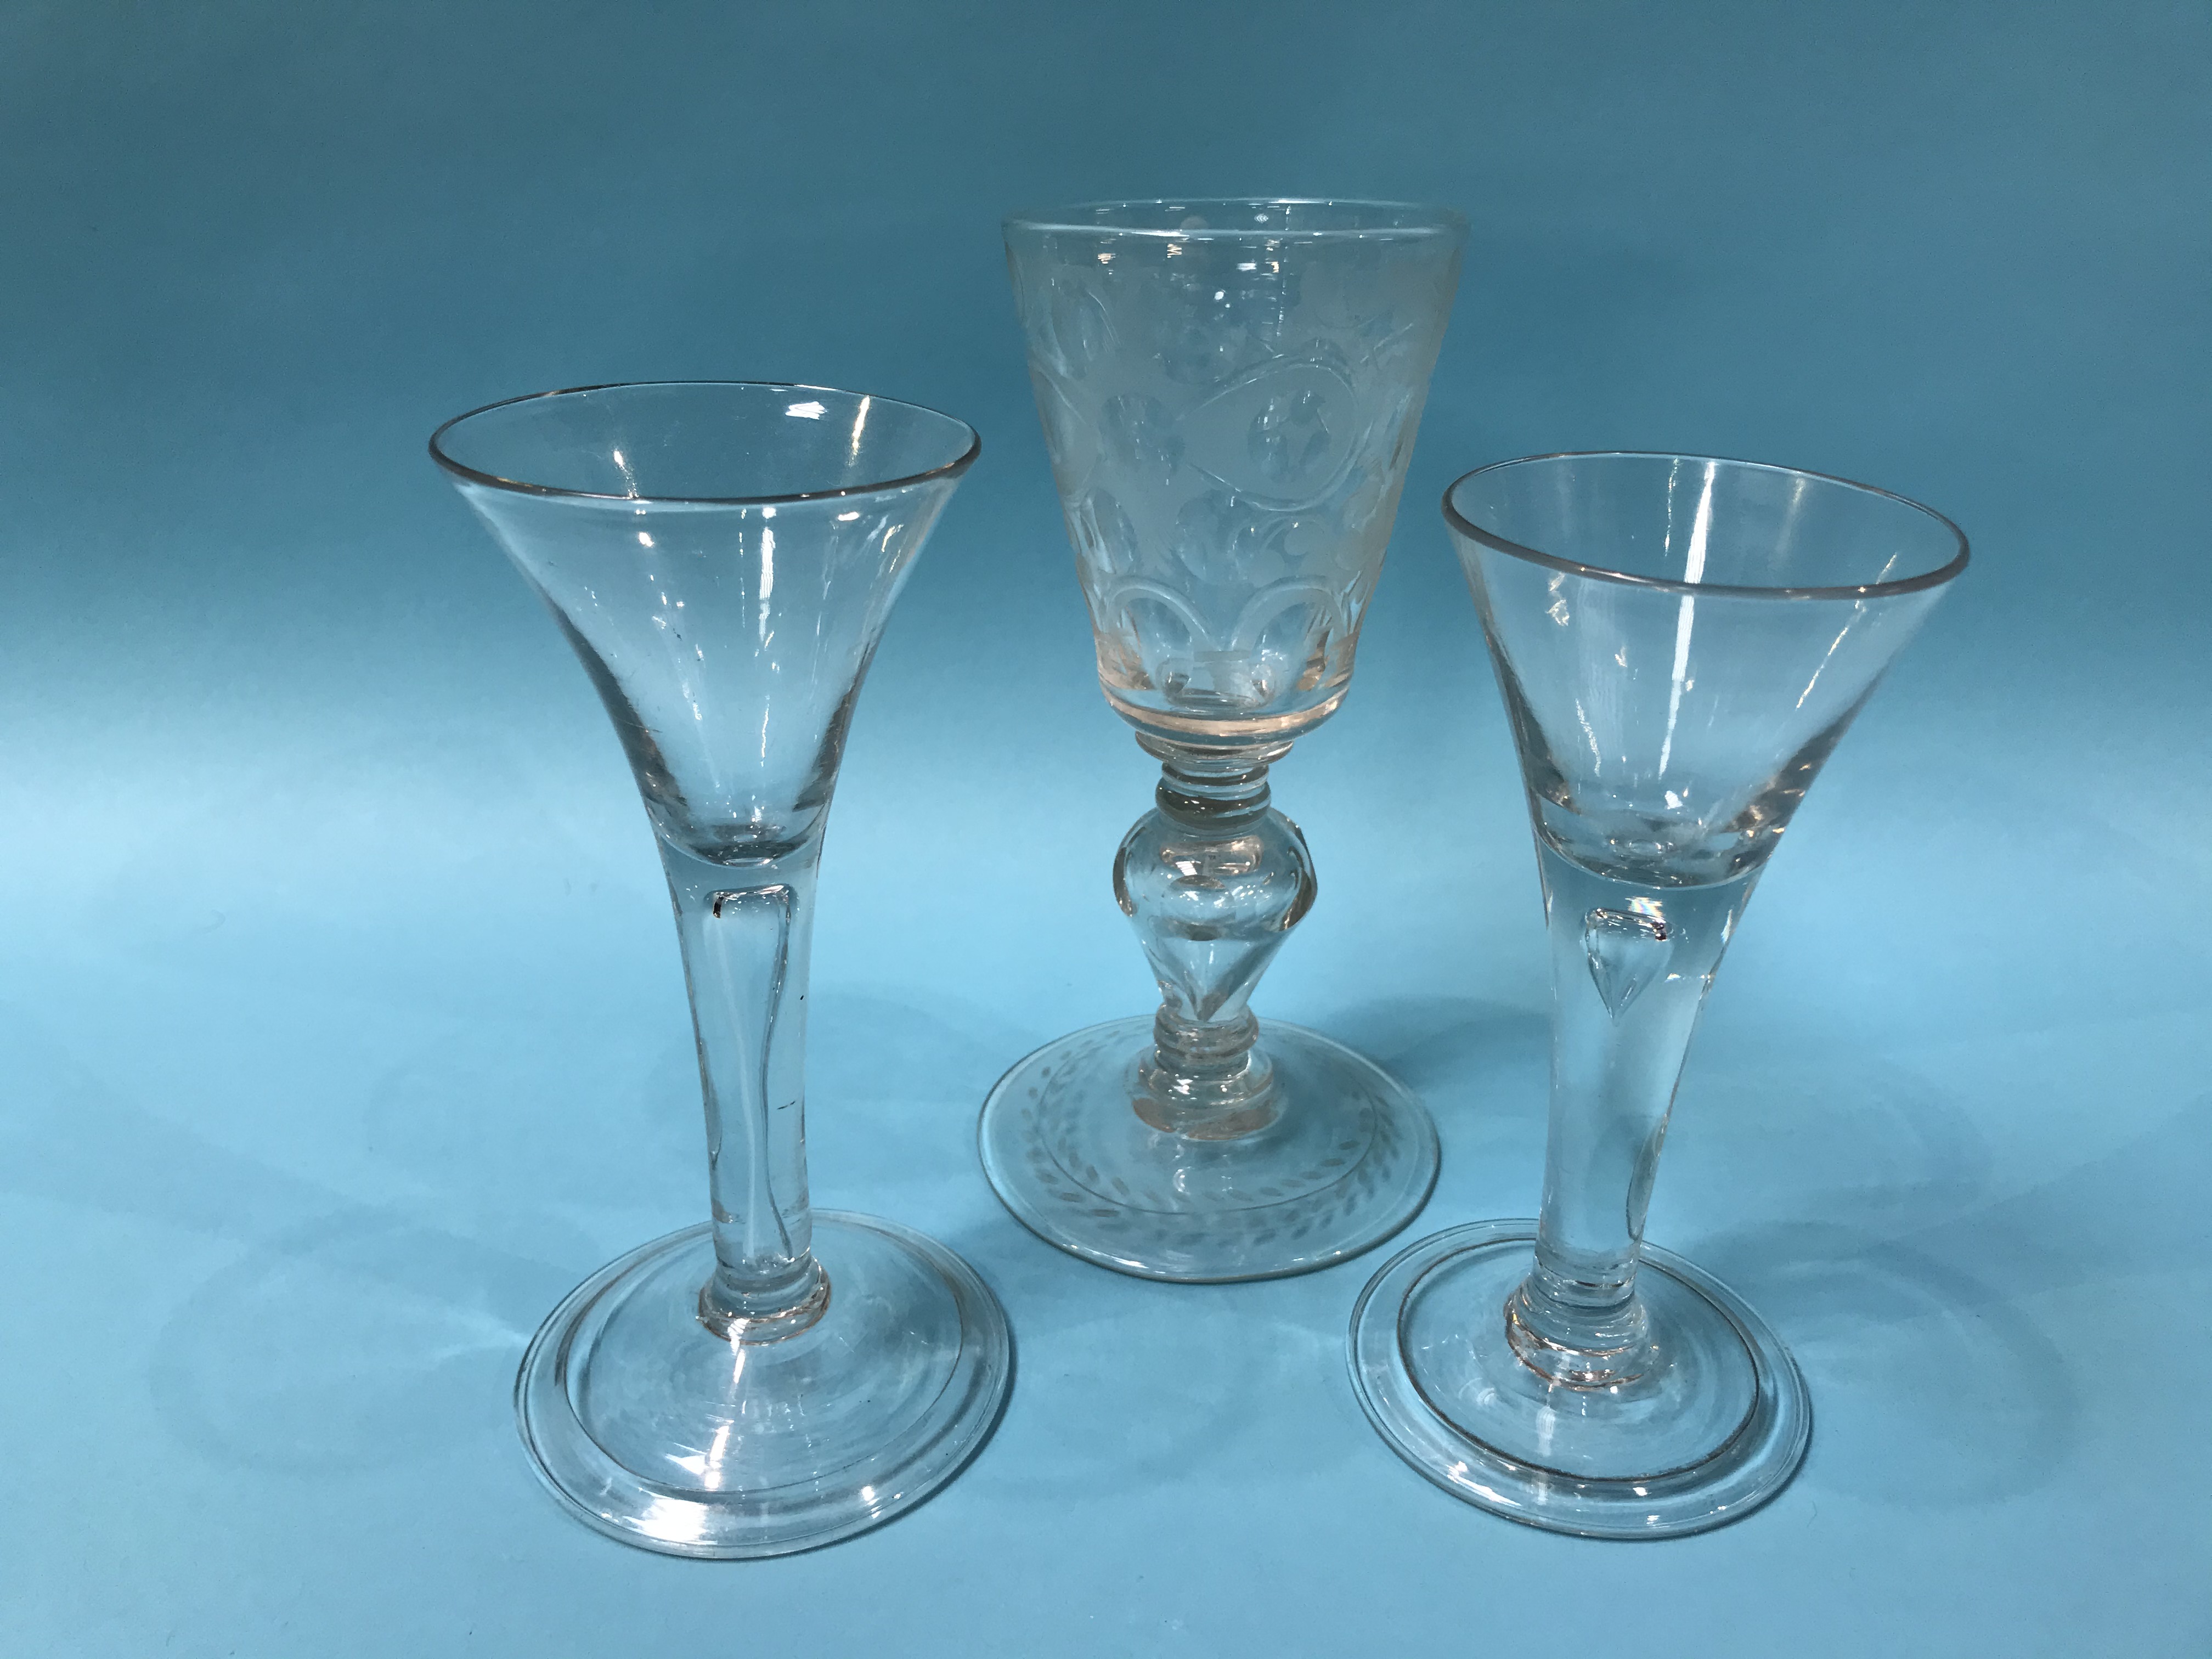 A 19th Century acid etched wine glass and two tear drop wine glasses - Image 2 of 2